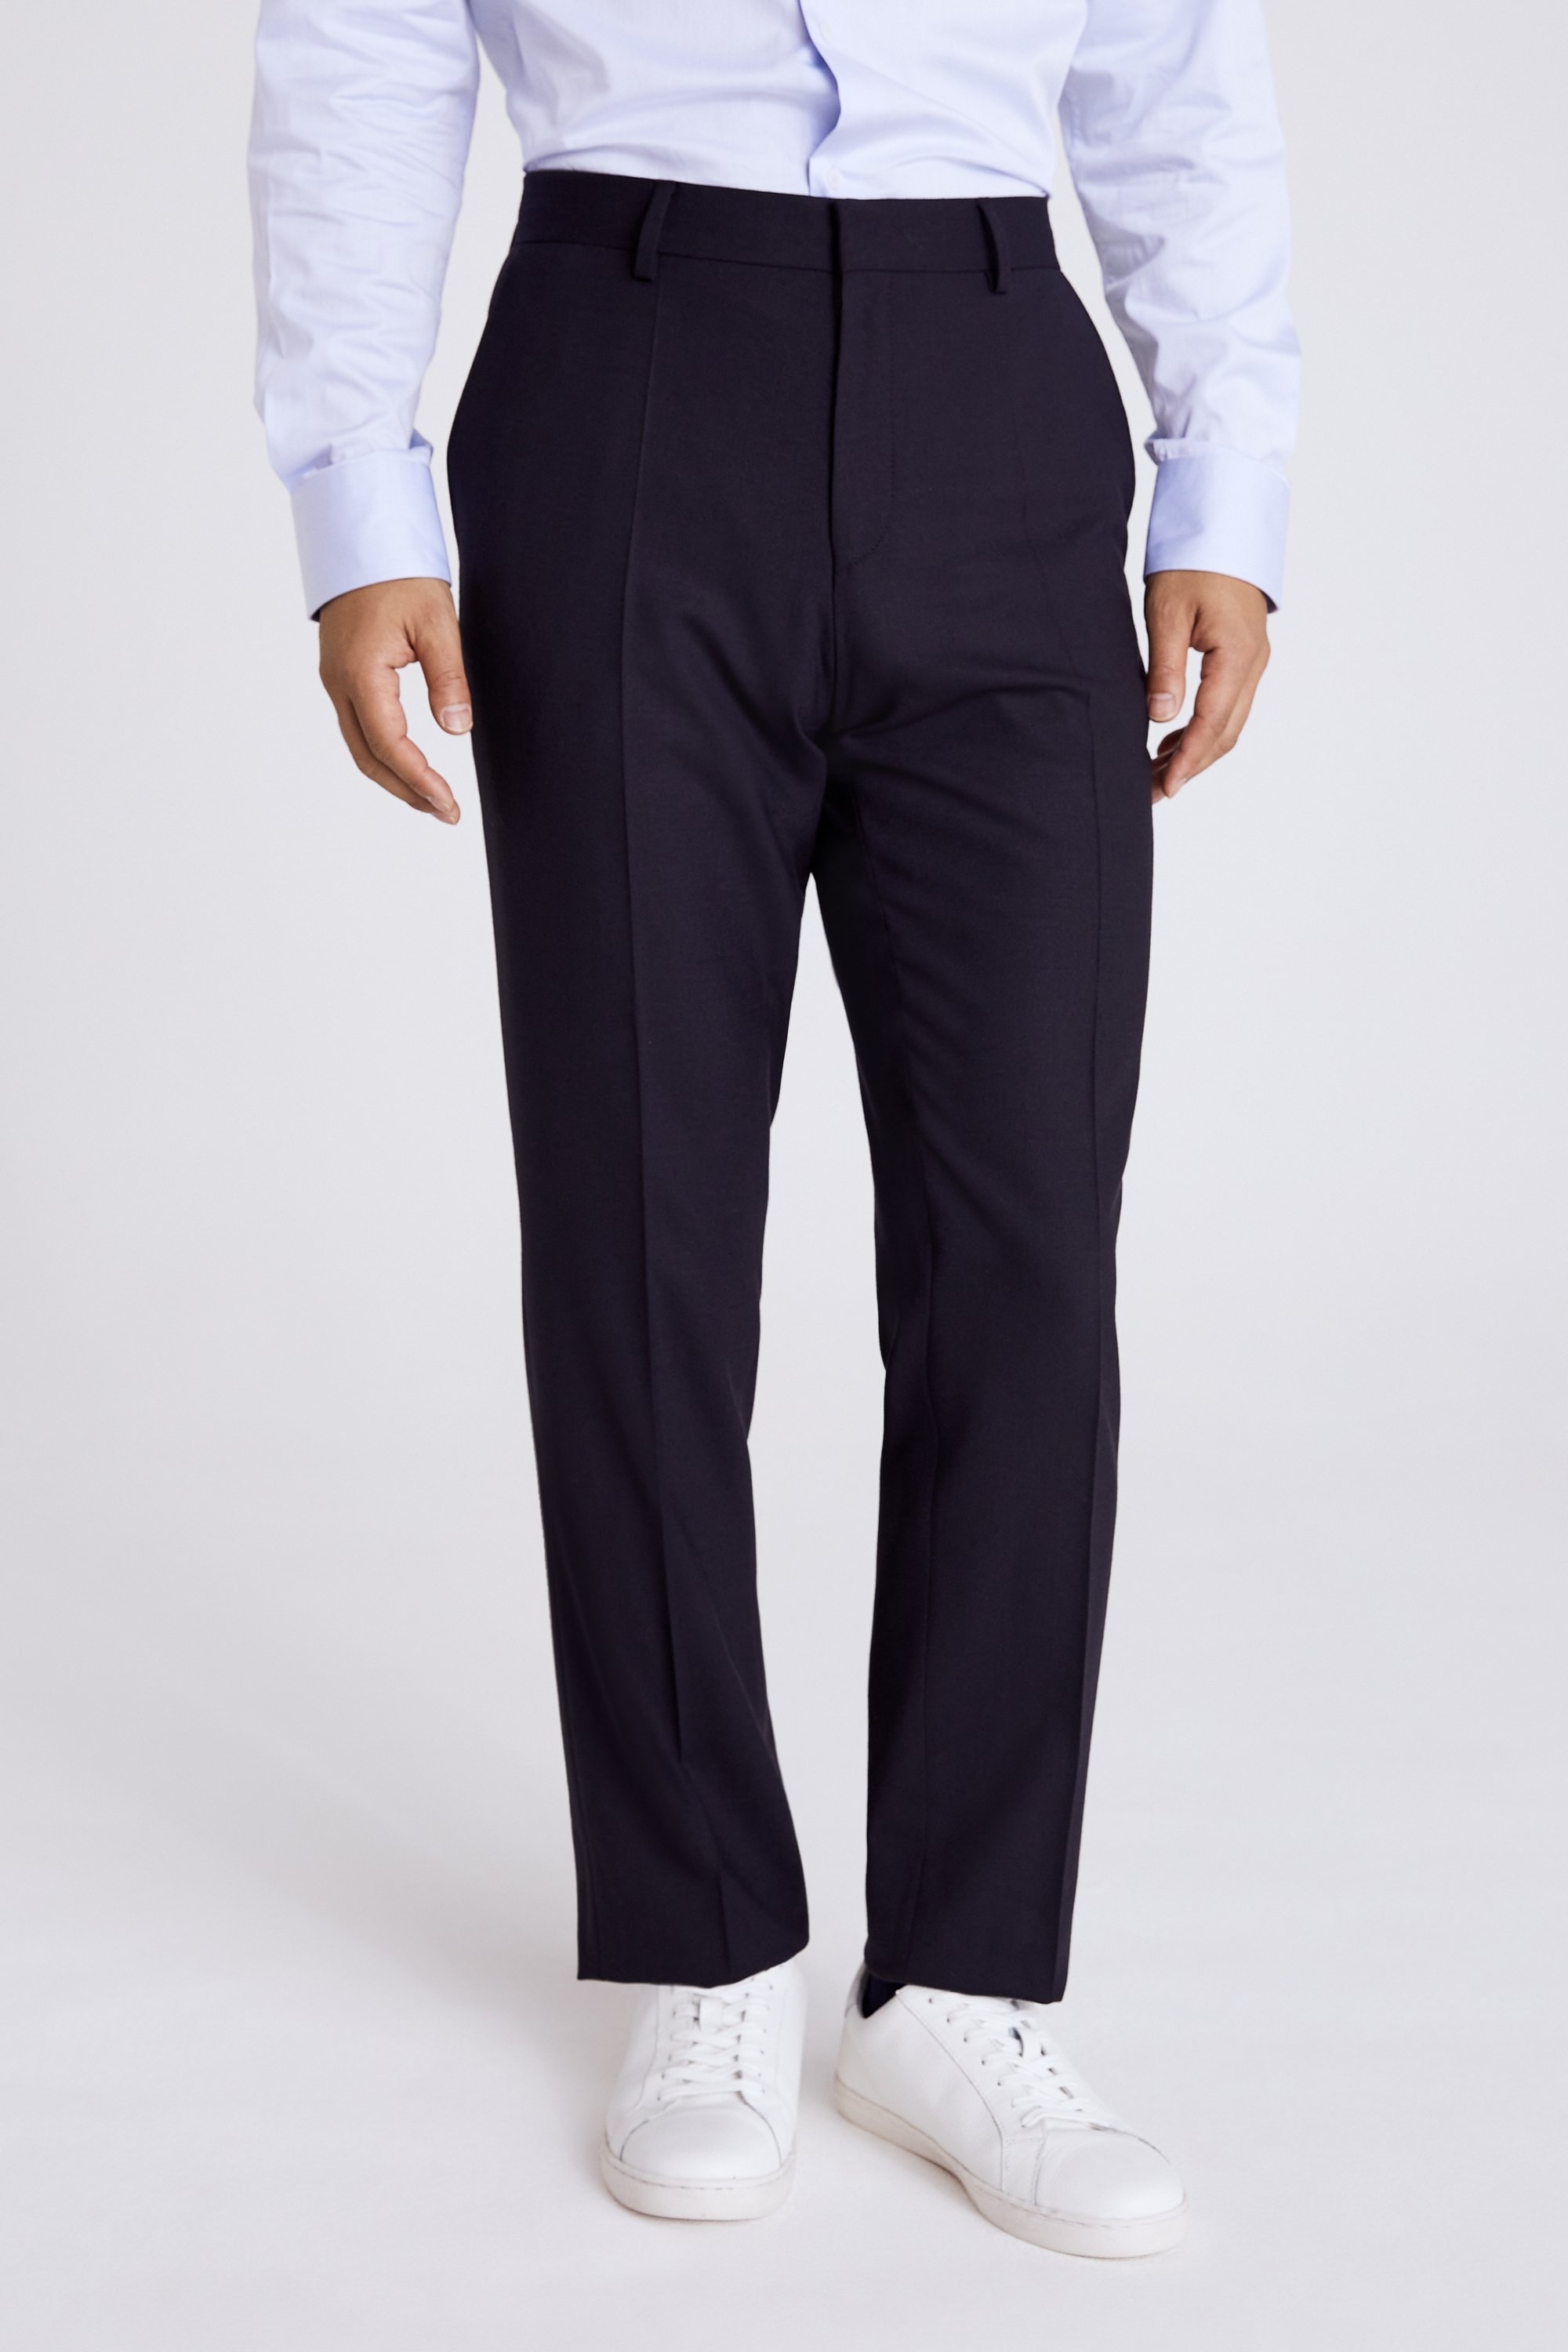 Slim Fit Navy Trousers | Buy Online at Moss